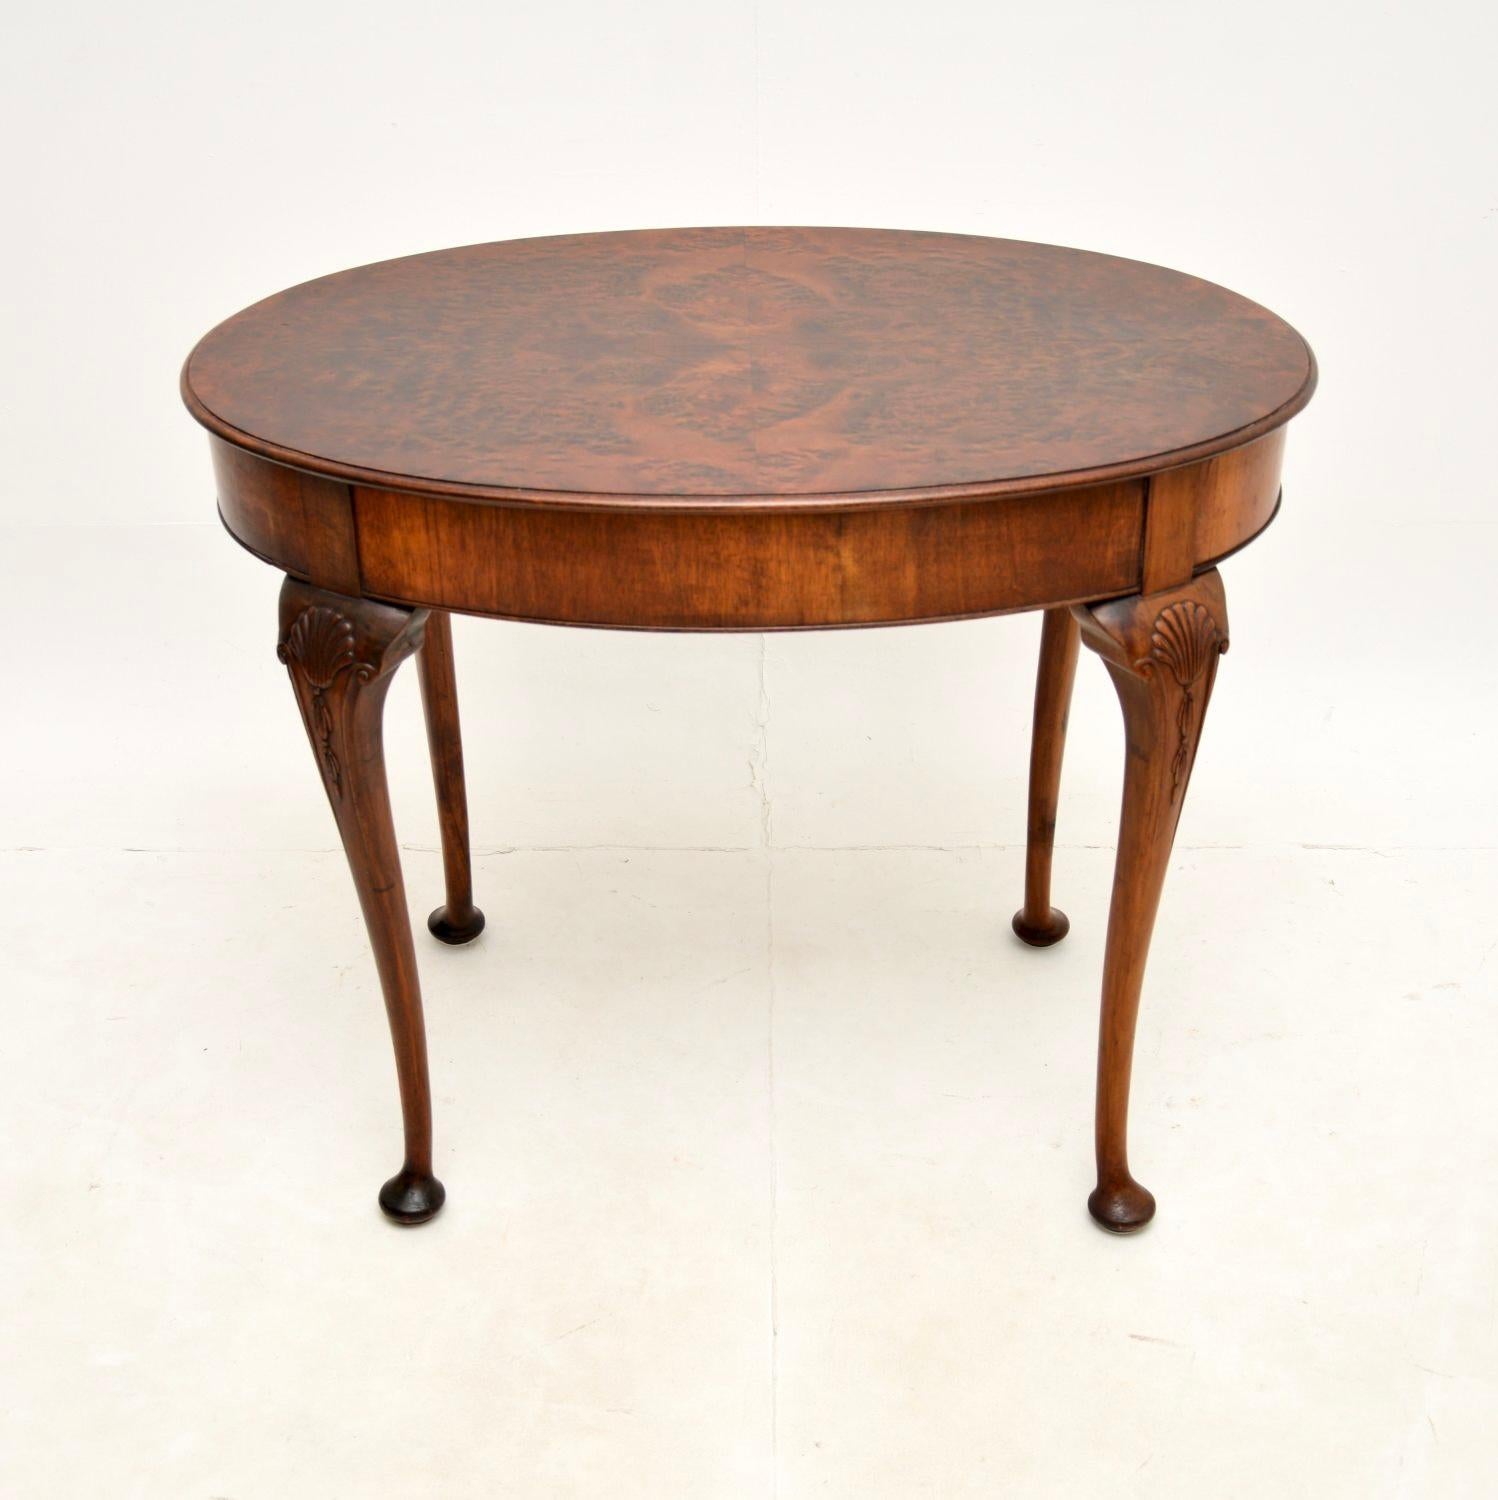 A stunning antique burr walnut occasional table. This was made in England, it dates from around the 1900-1910 period.

It is of superb quality, the oval top has gorgeous burr walnut grain patterns. This sits on slender yet sturdy cabriole legs with